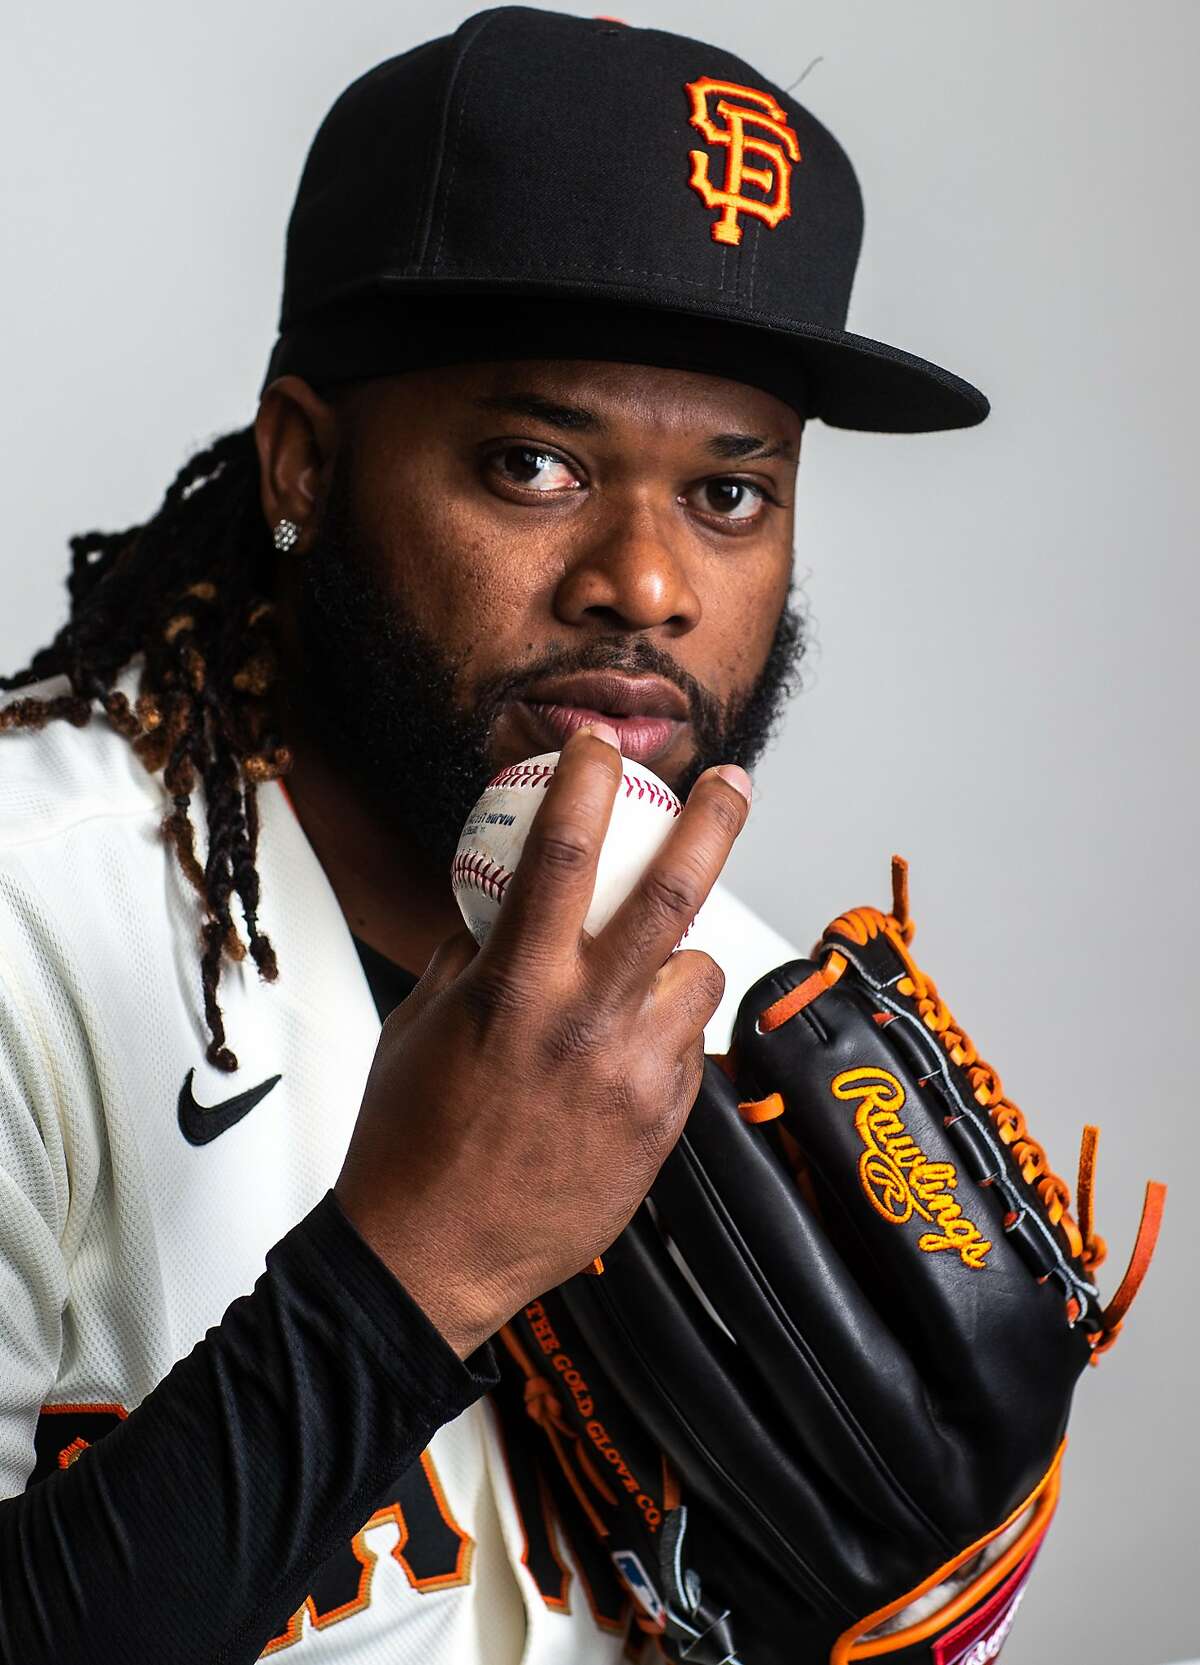 PHOENIX, AZ - FEBRUARY 18: Johnny Cueto $47 of the San Francisco Giants poses for a portrait on Photo Day at Scottsdale Stadium, the spring training complex of the San Francisco Giants on February 18, 2020 in Phoenix, Arizona. (Photo by Rob Tringali/Getty Images)